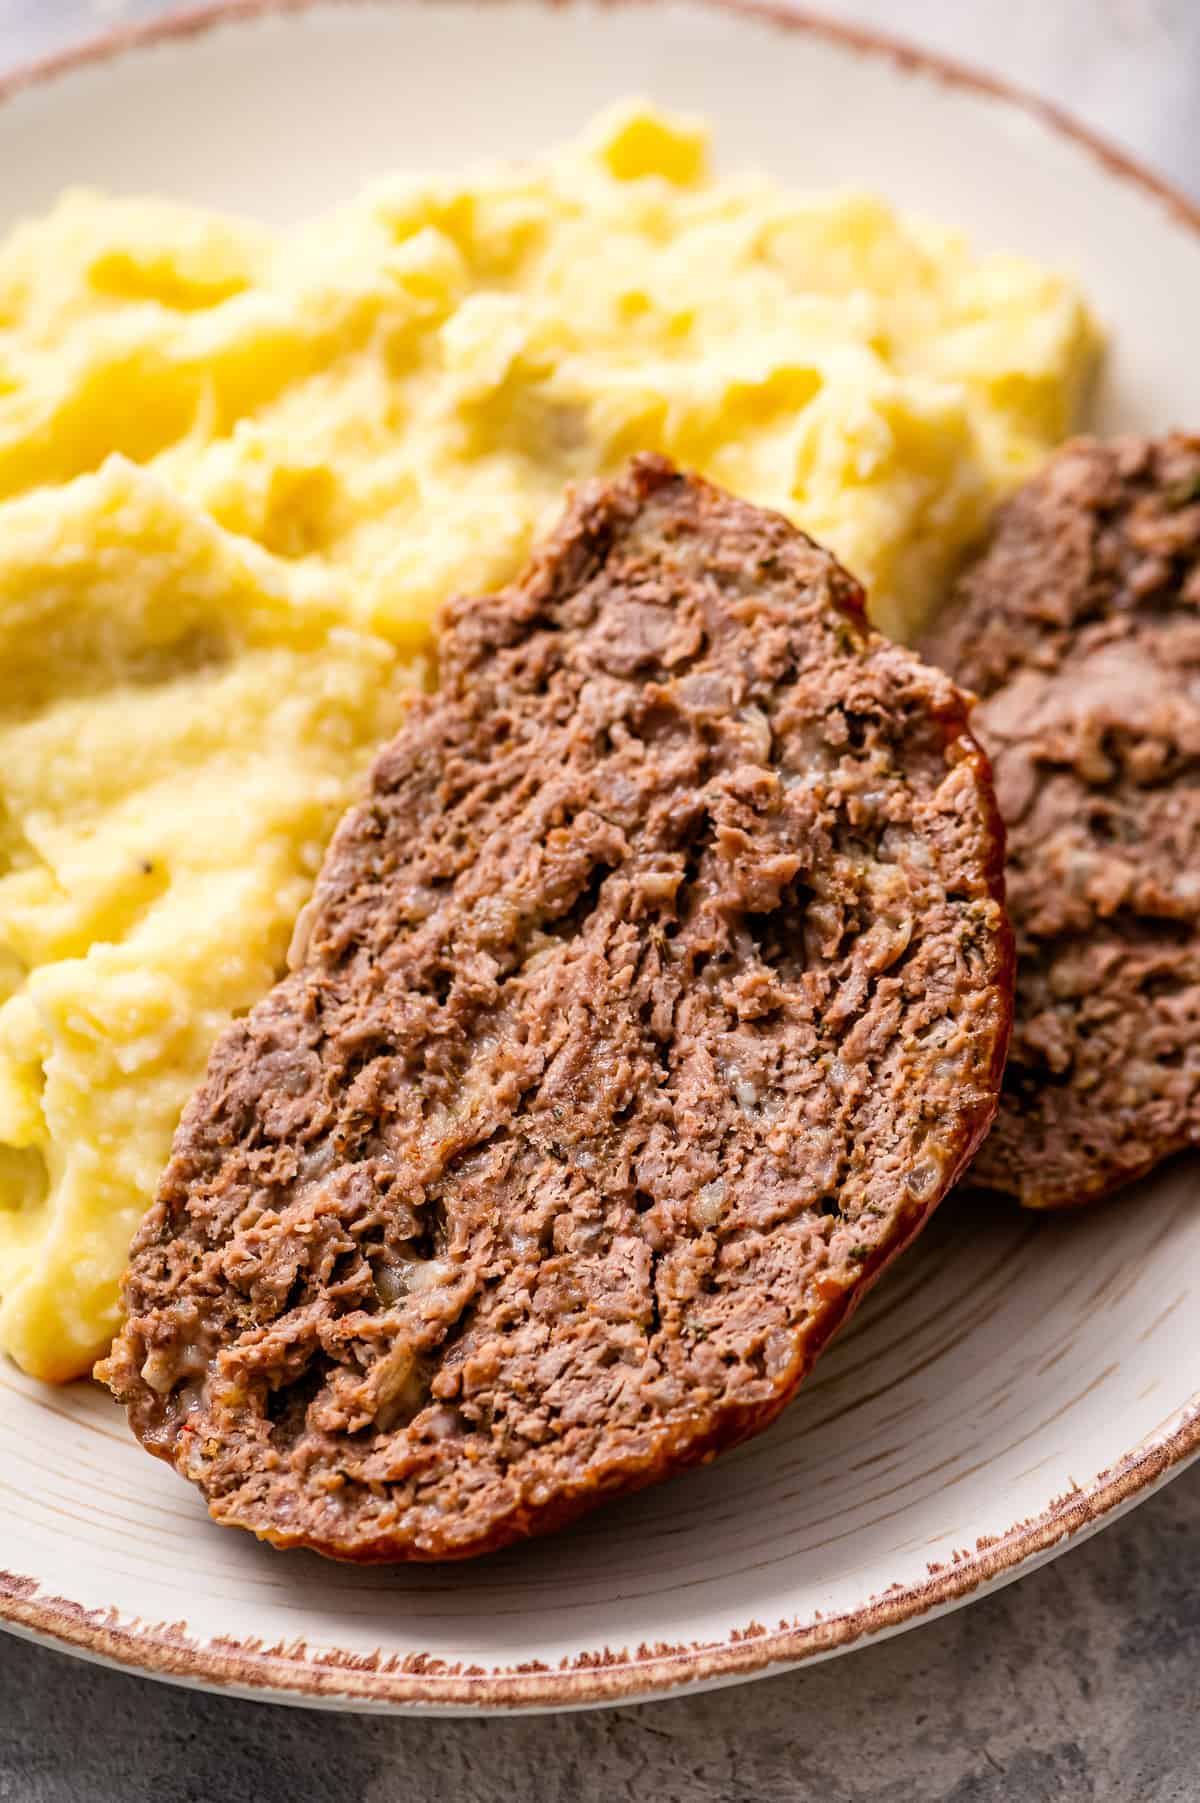 Sliced Meatloaf and mashed potatoes on plate